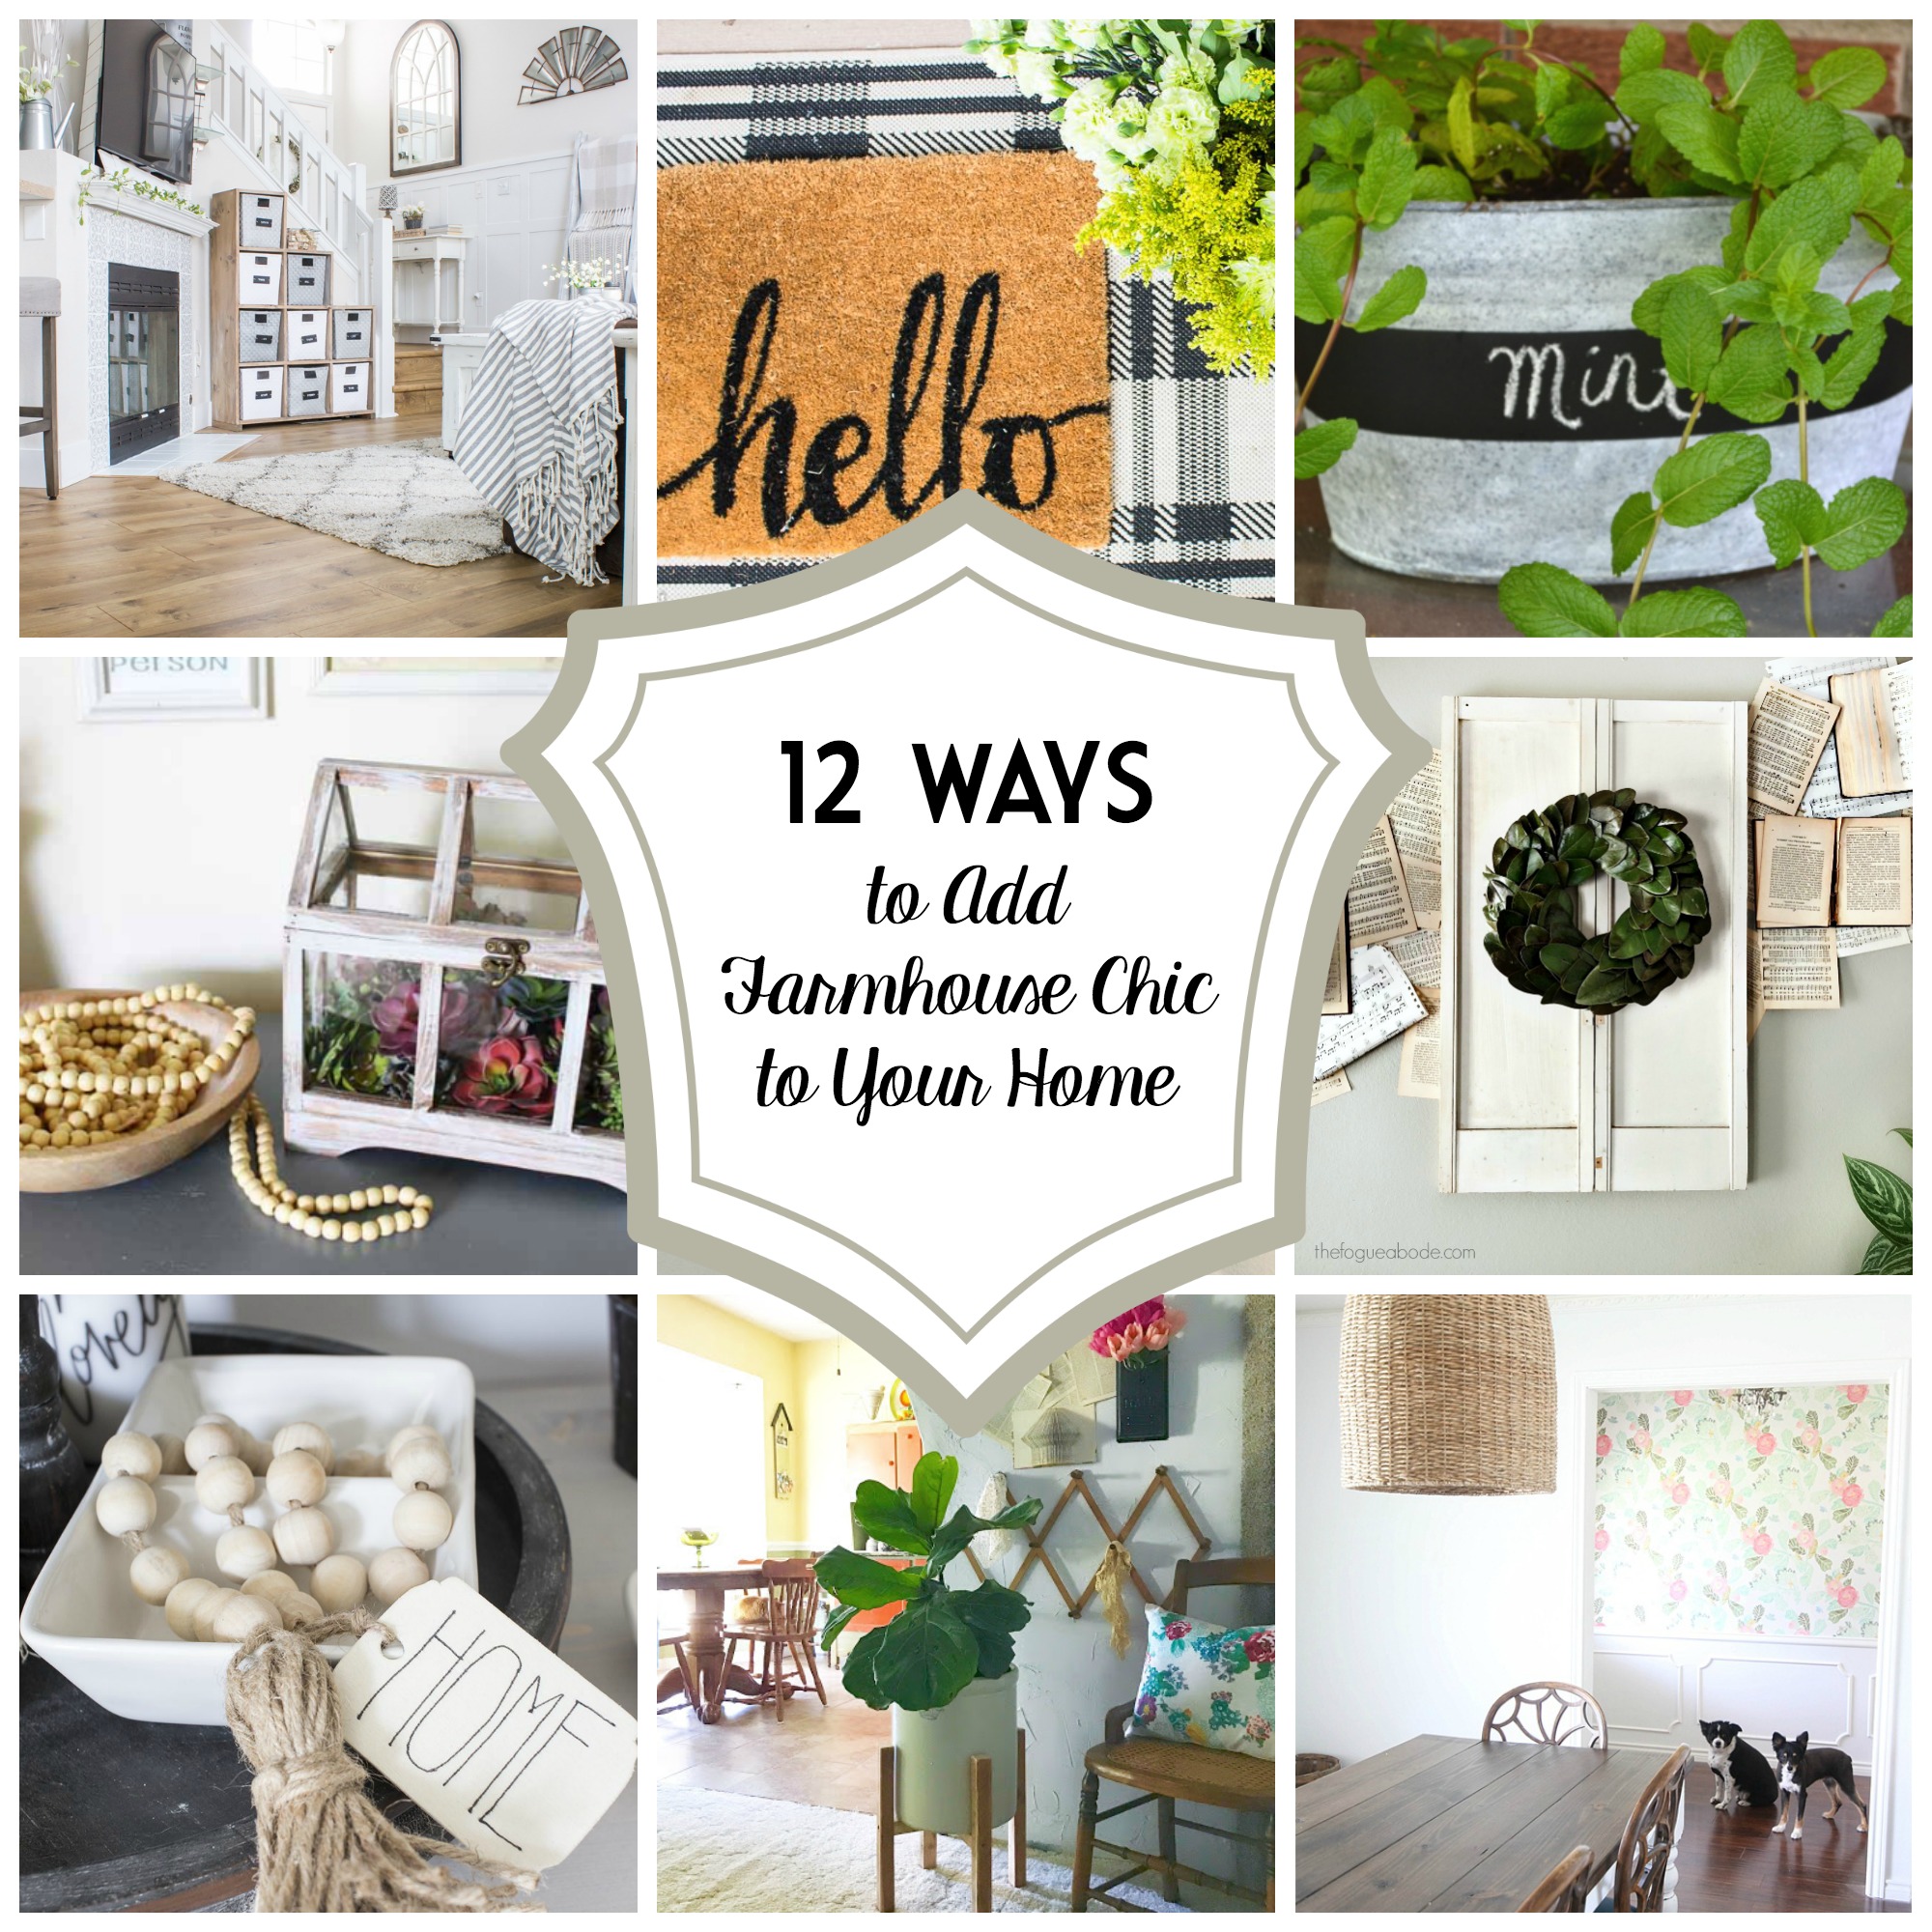 12 Ways to Add Farmhouse Chic to Your Home